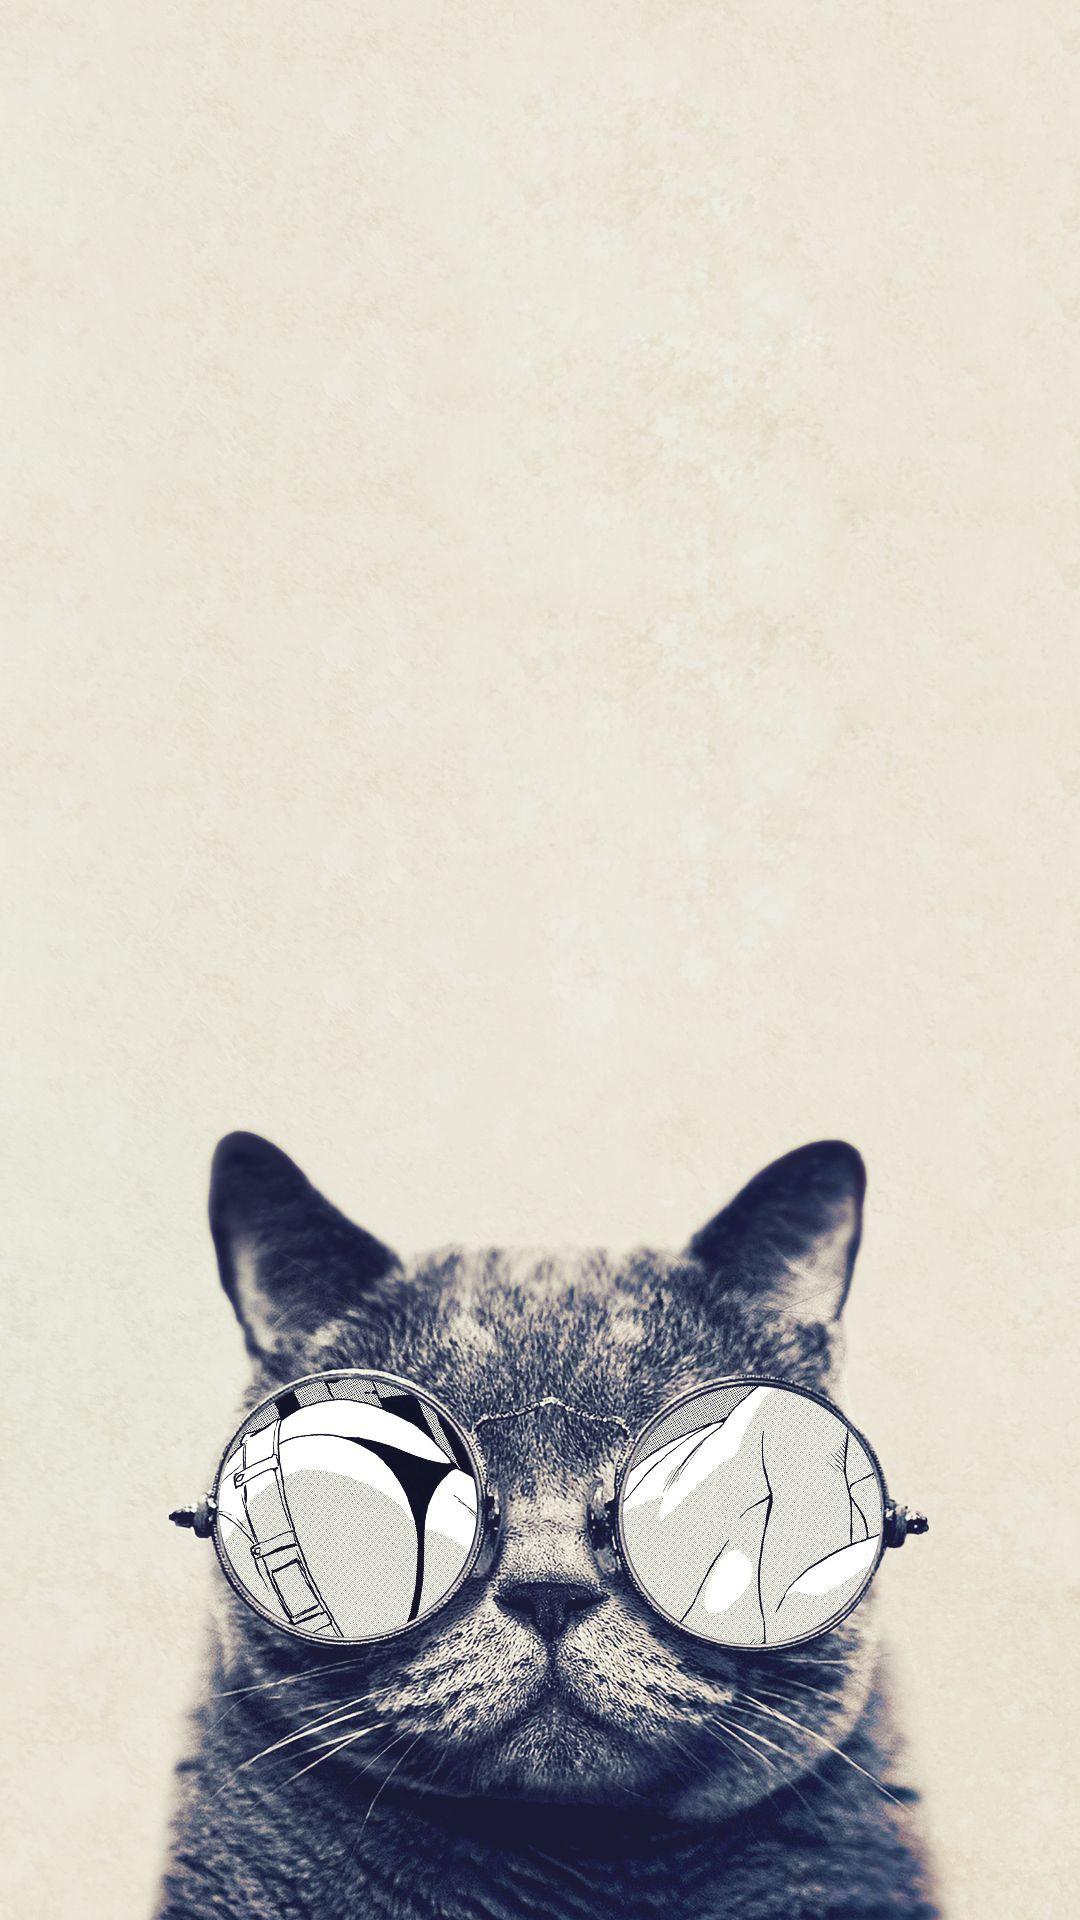 AMAZING ANIMAL IPHONE WALLPAPER FREE TO DOWNLOAD. Cat